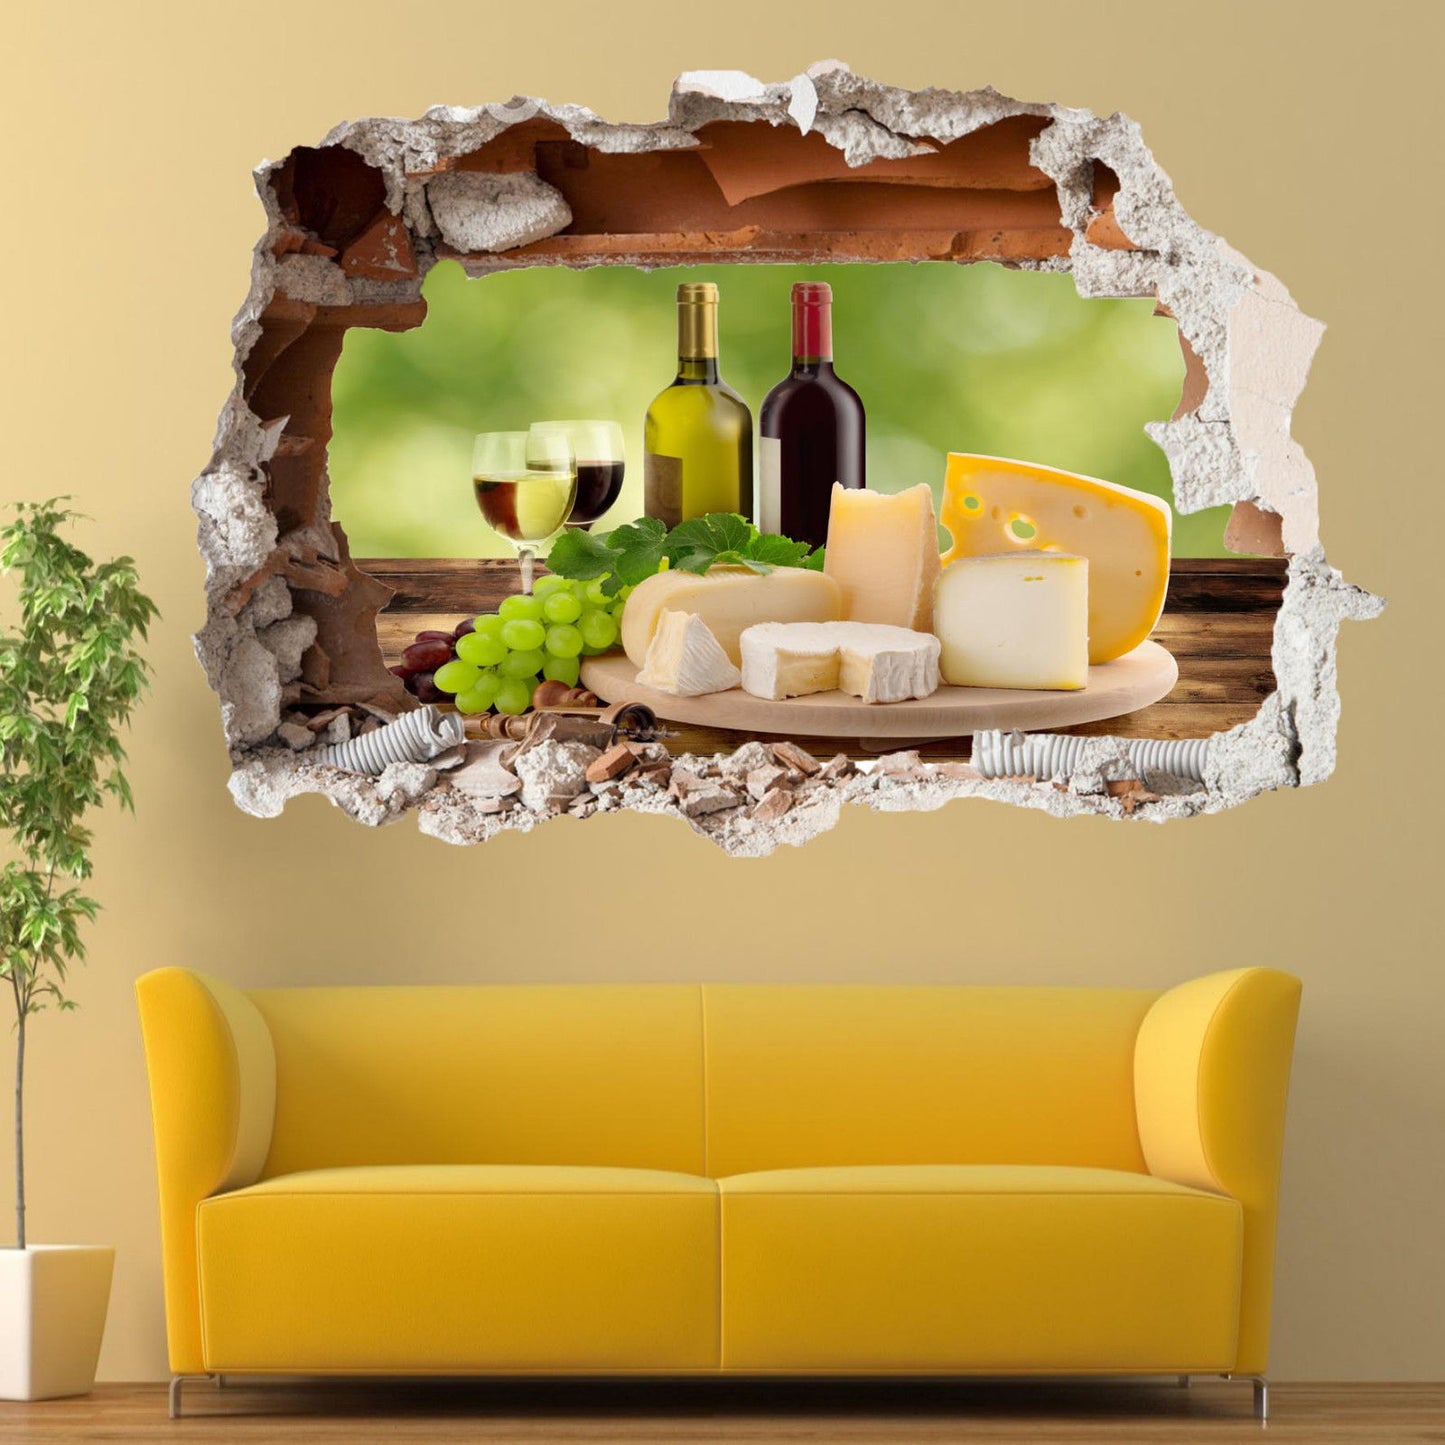 Luxury Cheese Grapes Wine Wall Stickers 3d Art Mural Room Office Shop Decor SB9